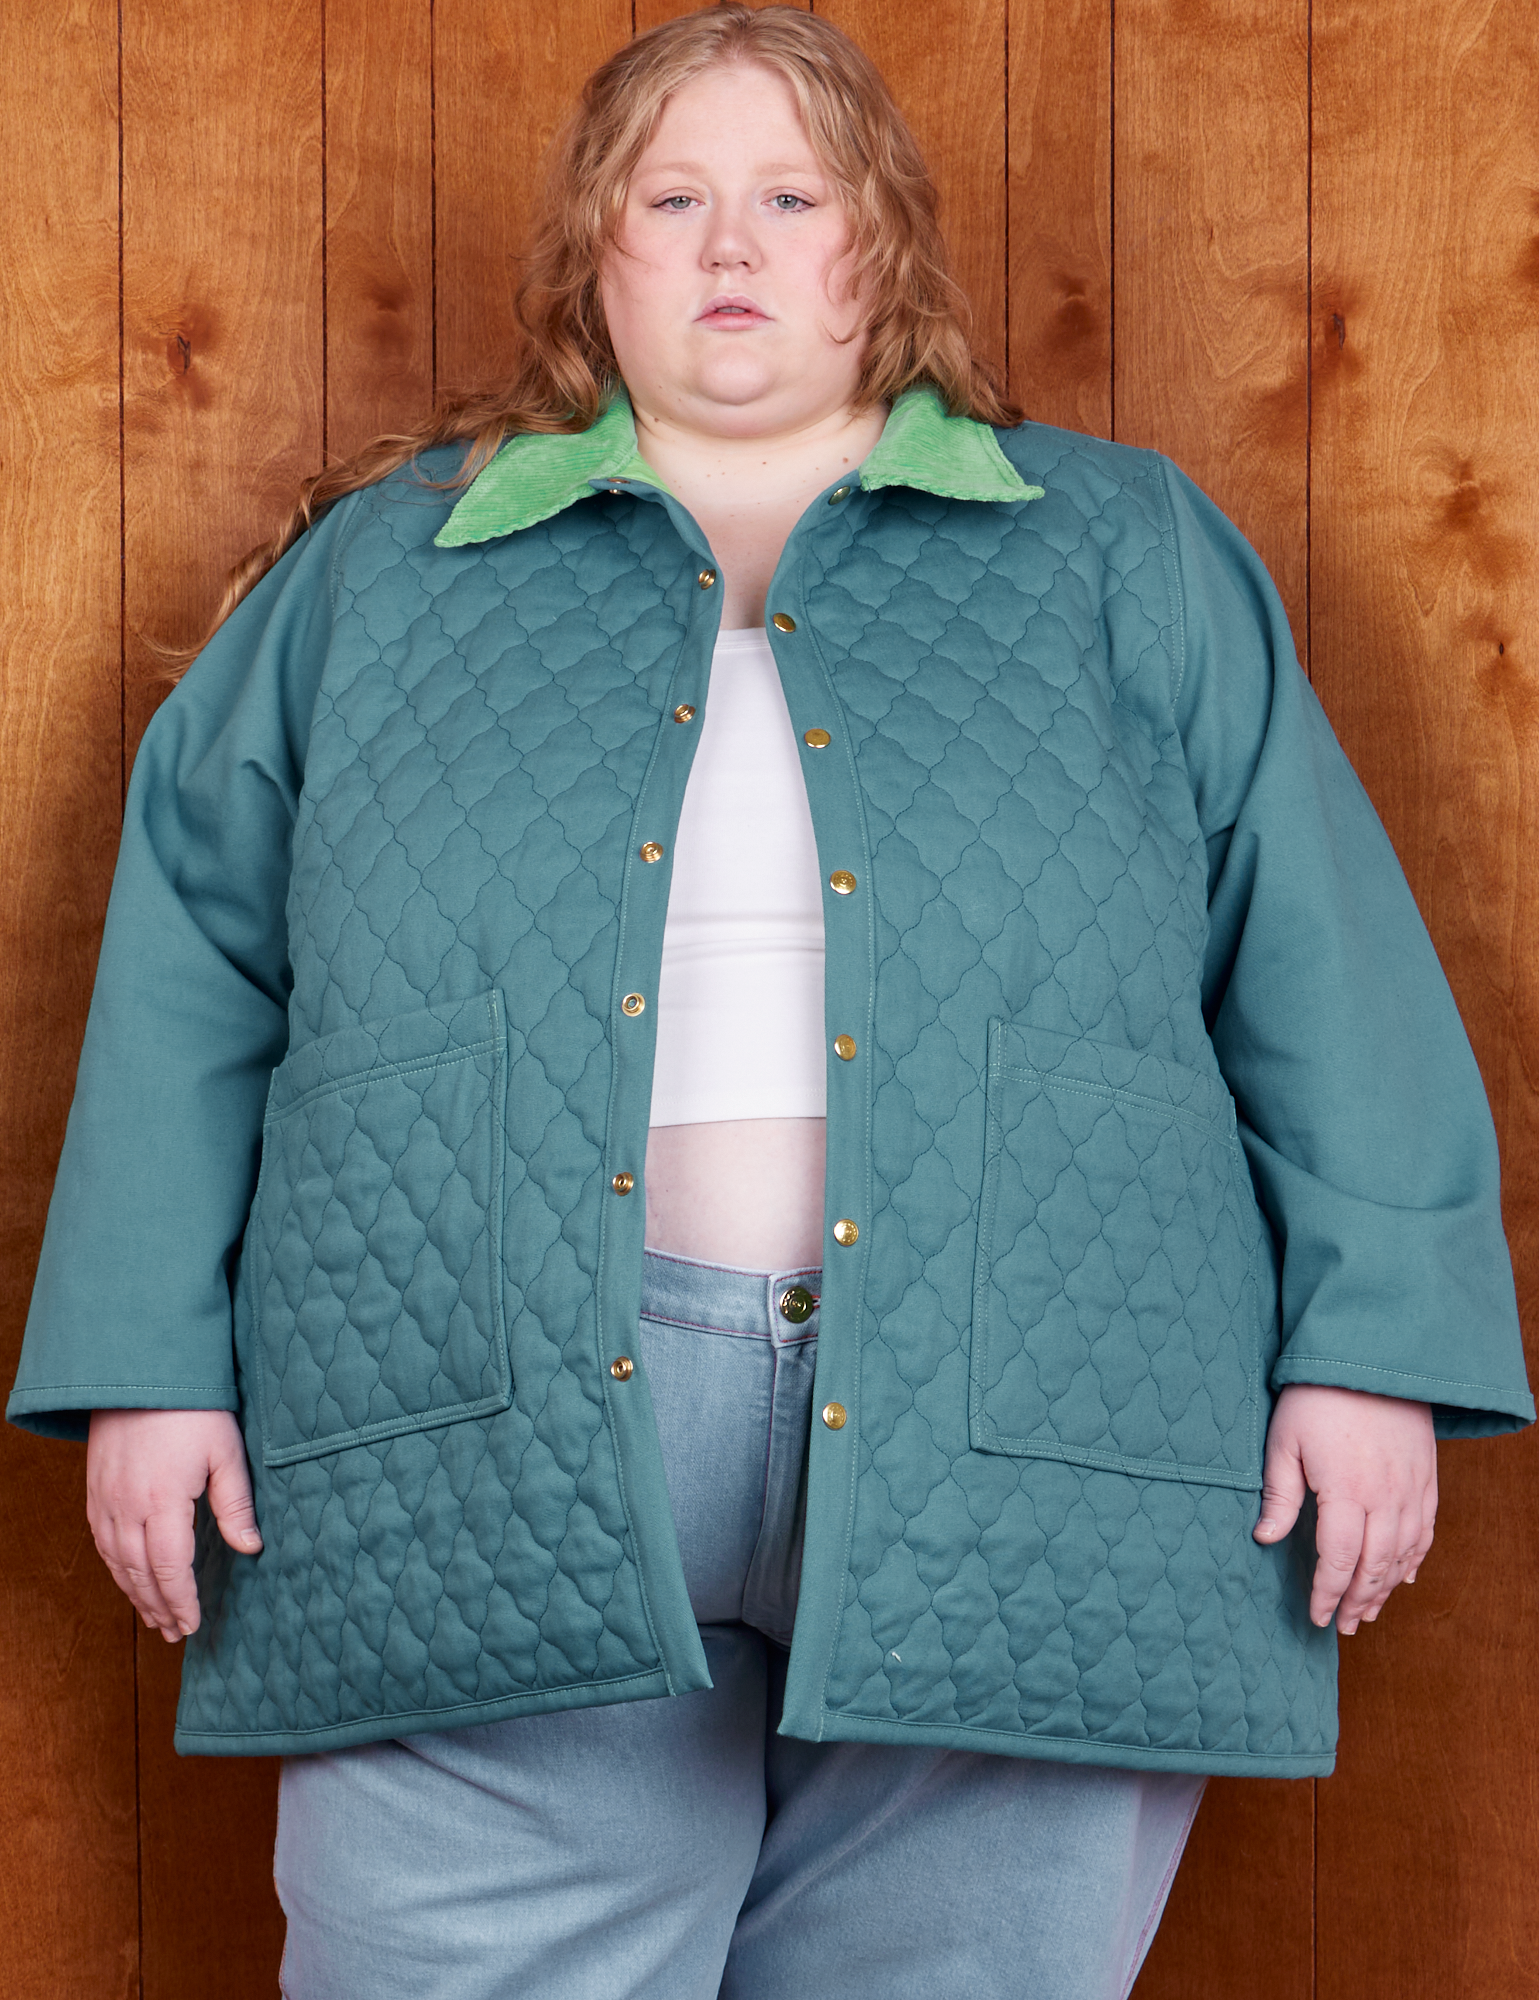 Catie is 5&#39;11&quot; and wearing 5XL Quilted Overcoat in Marine Blue